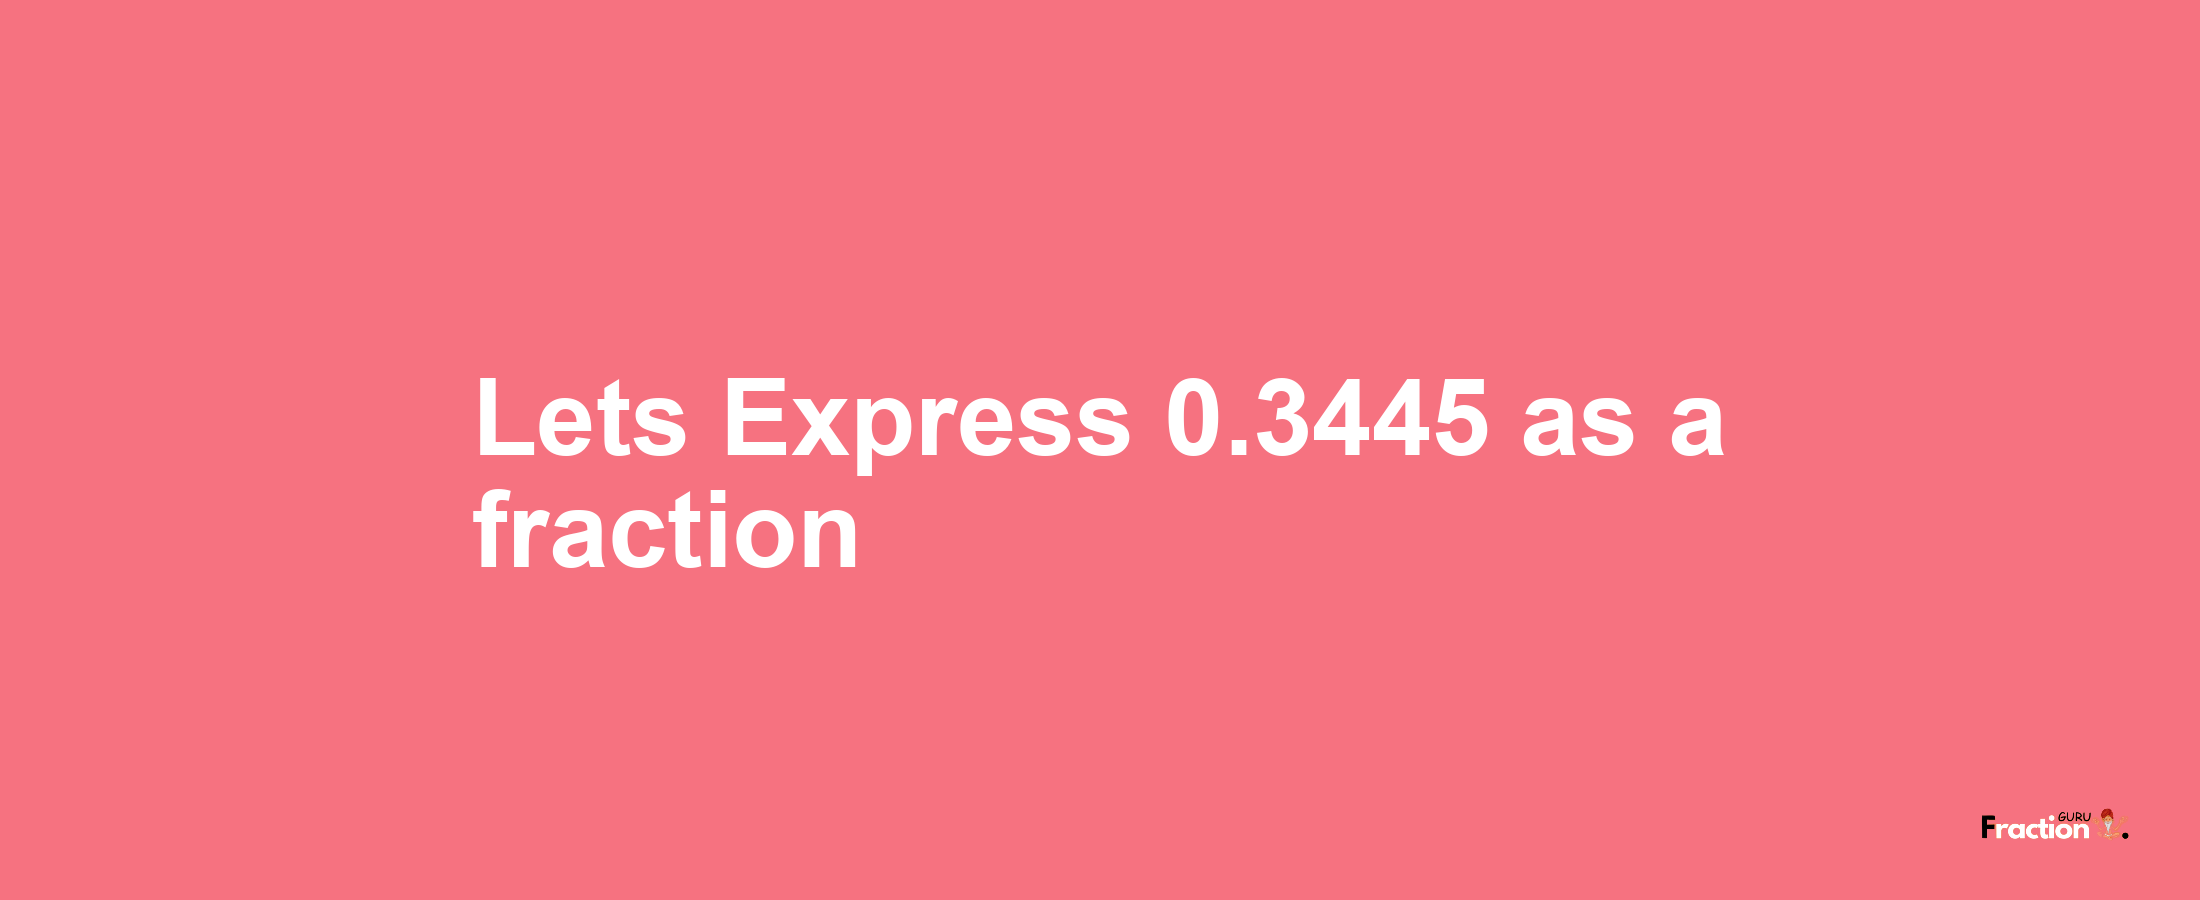 Lets Express 0.3445 as afraction